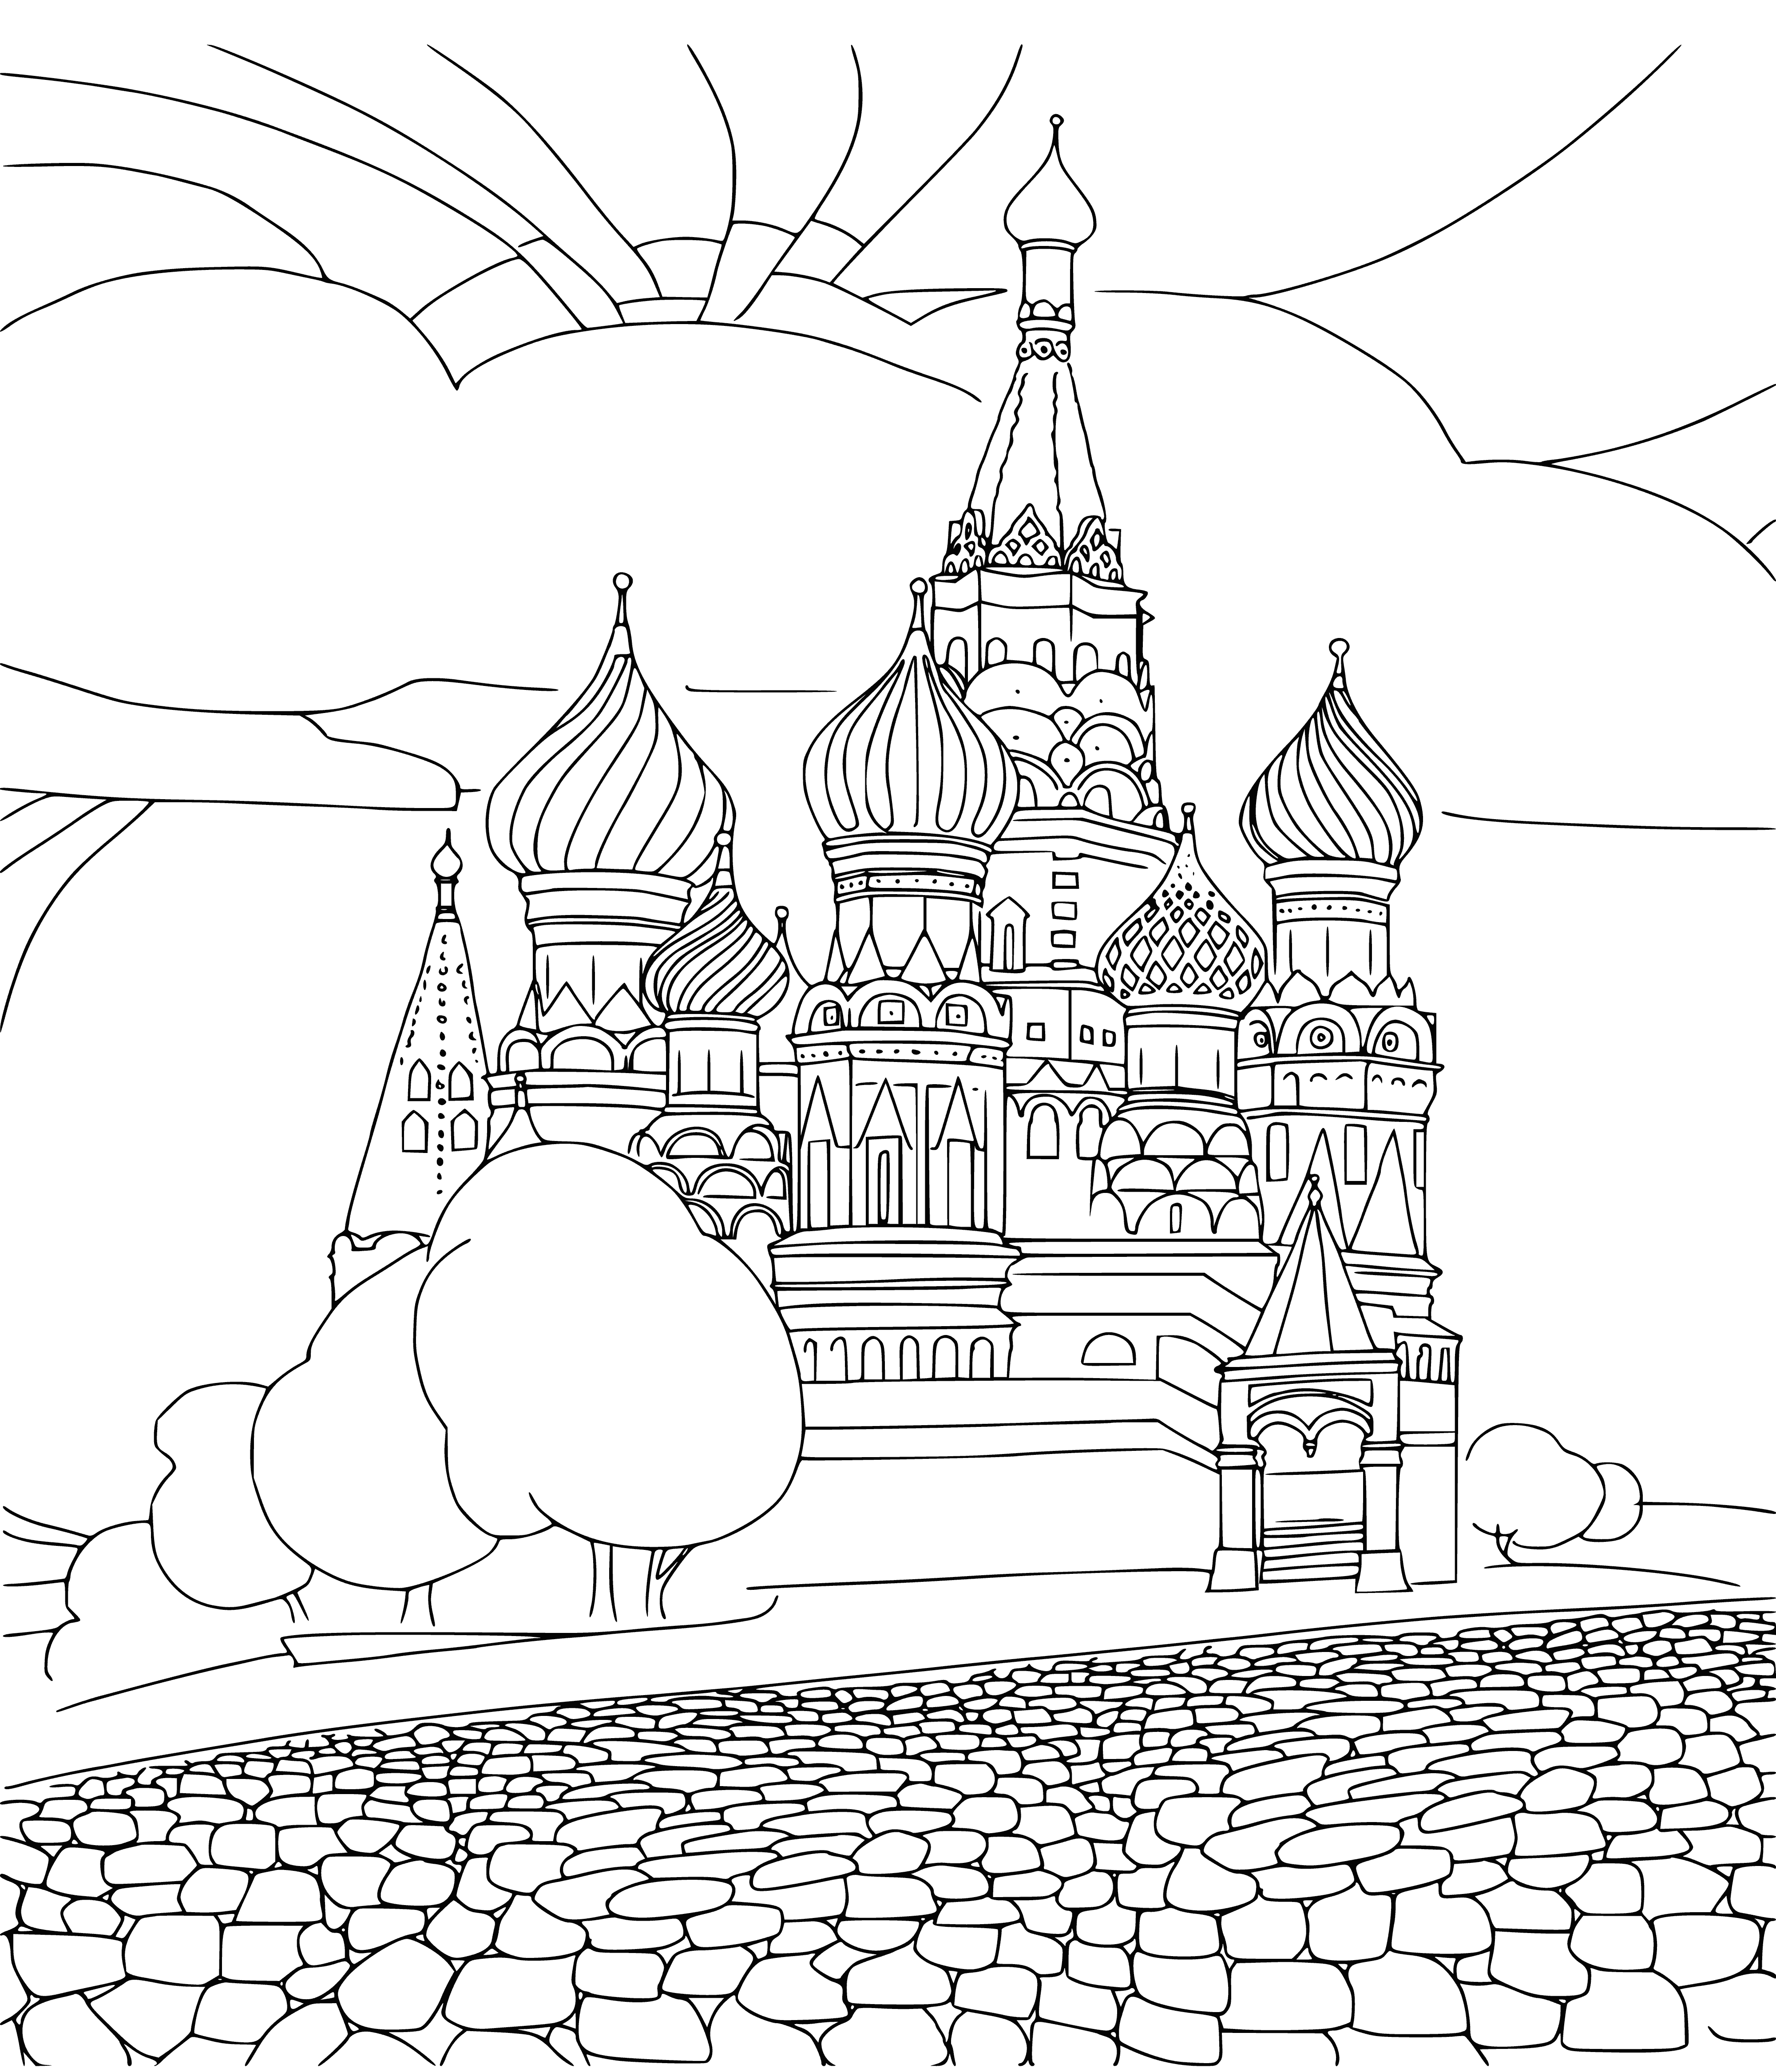 coloring page: St. Basil's Cathedral in Moscow, Russia is a beautiful, ornate building known for it's brightly colored patterns & multiple domes. People often mill around the fountain in the square that surrounds it.